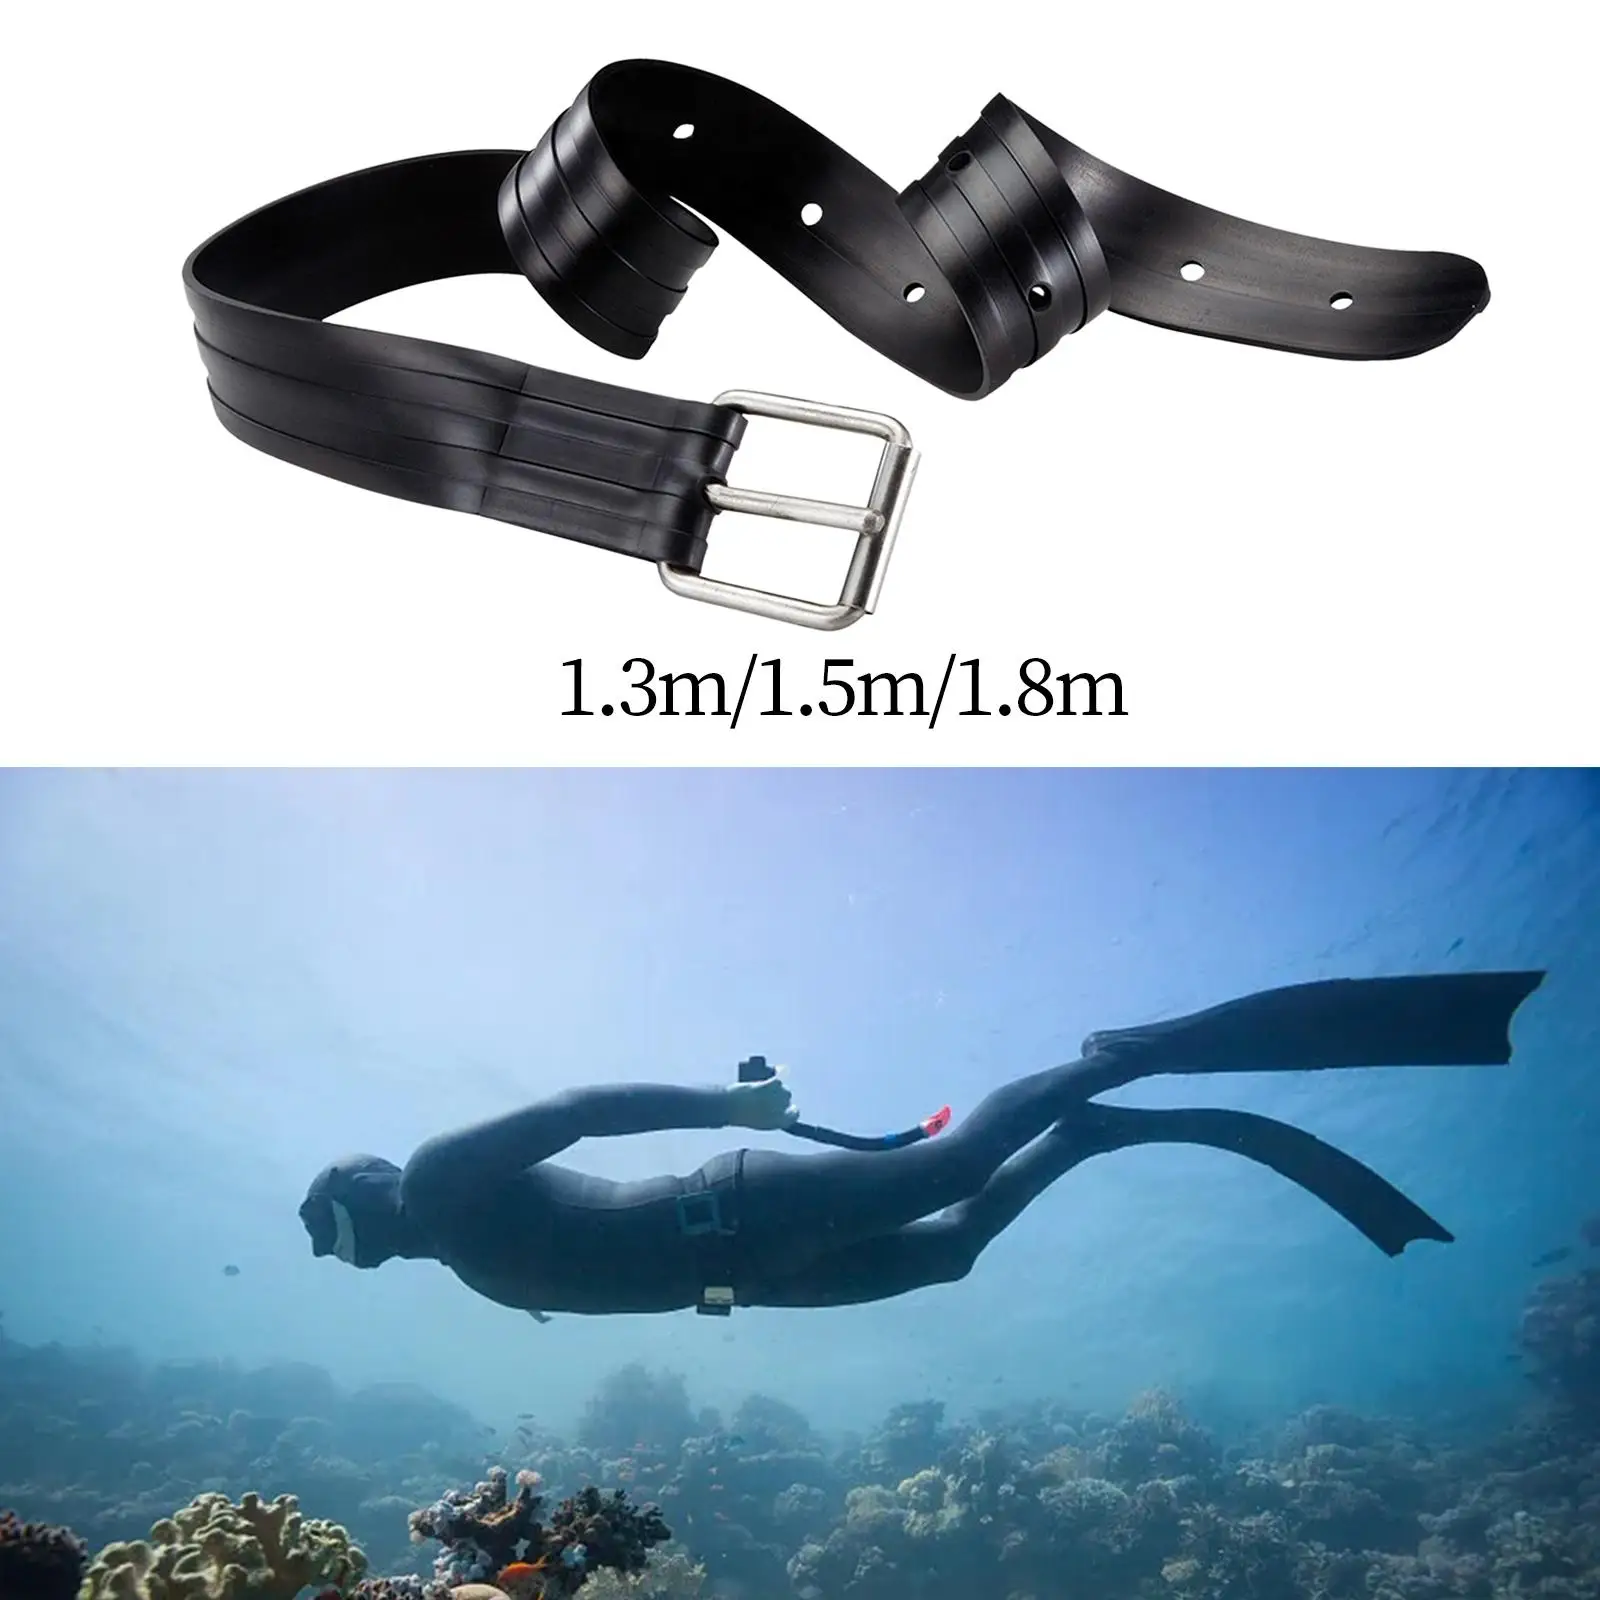 Weight Diving Belt to Help Divers Rubber Waist Belt Weight Strap Belts Webbing for Outdoor Underwater Sports Spearfishing